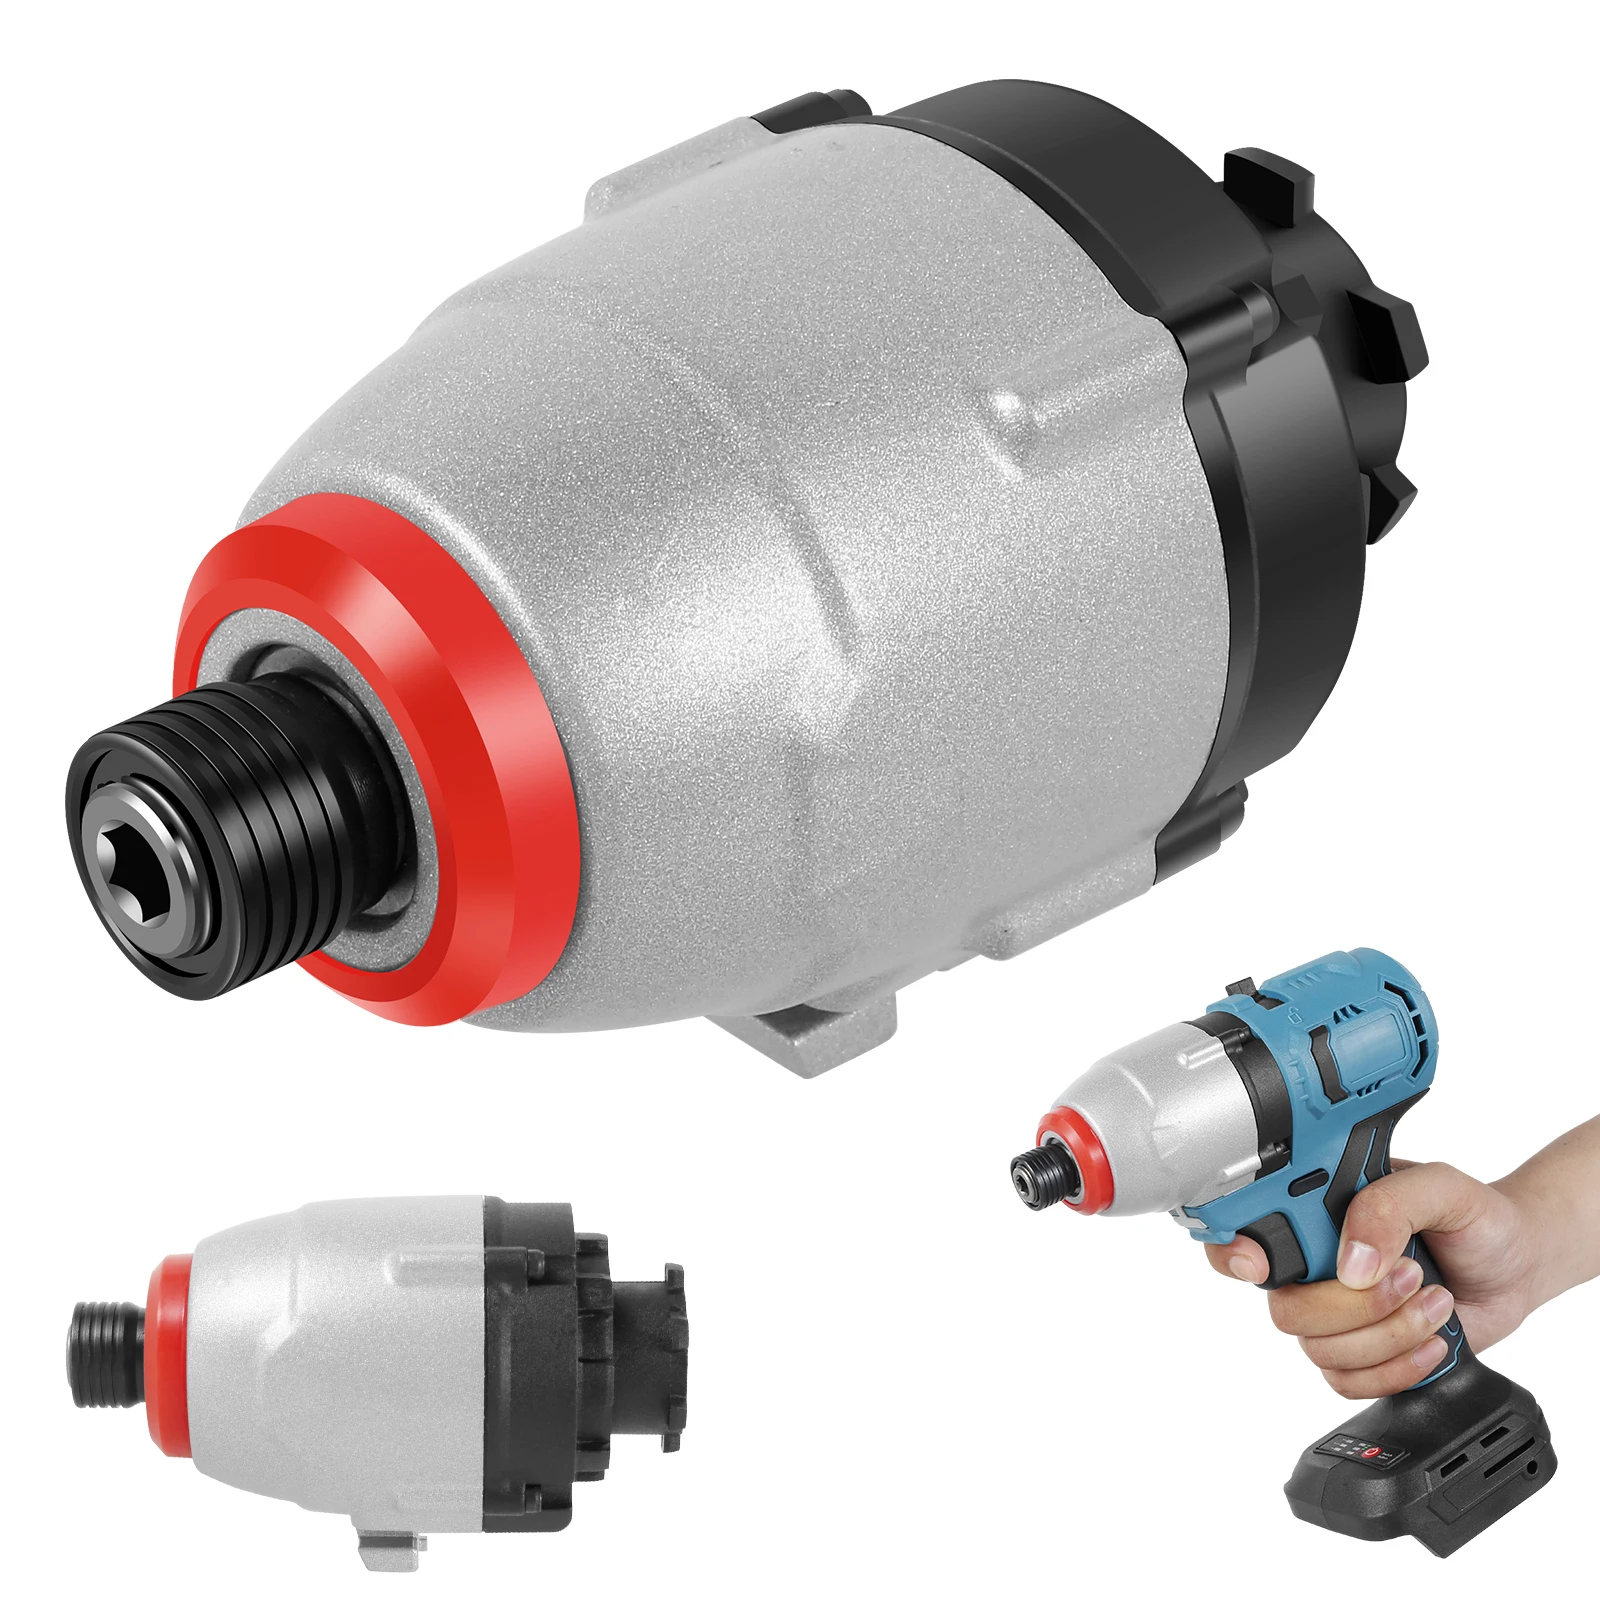 

Impact Wrench 3600r/min 180NM High-Torque Electric Impact Wrench 1/4 Inch Professional Cordless Powerful Wrench Woodworking Tool